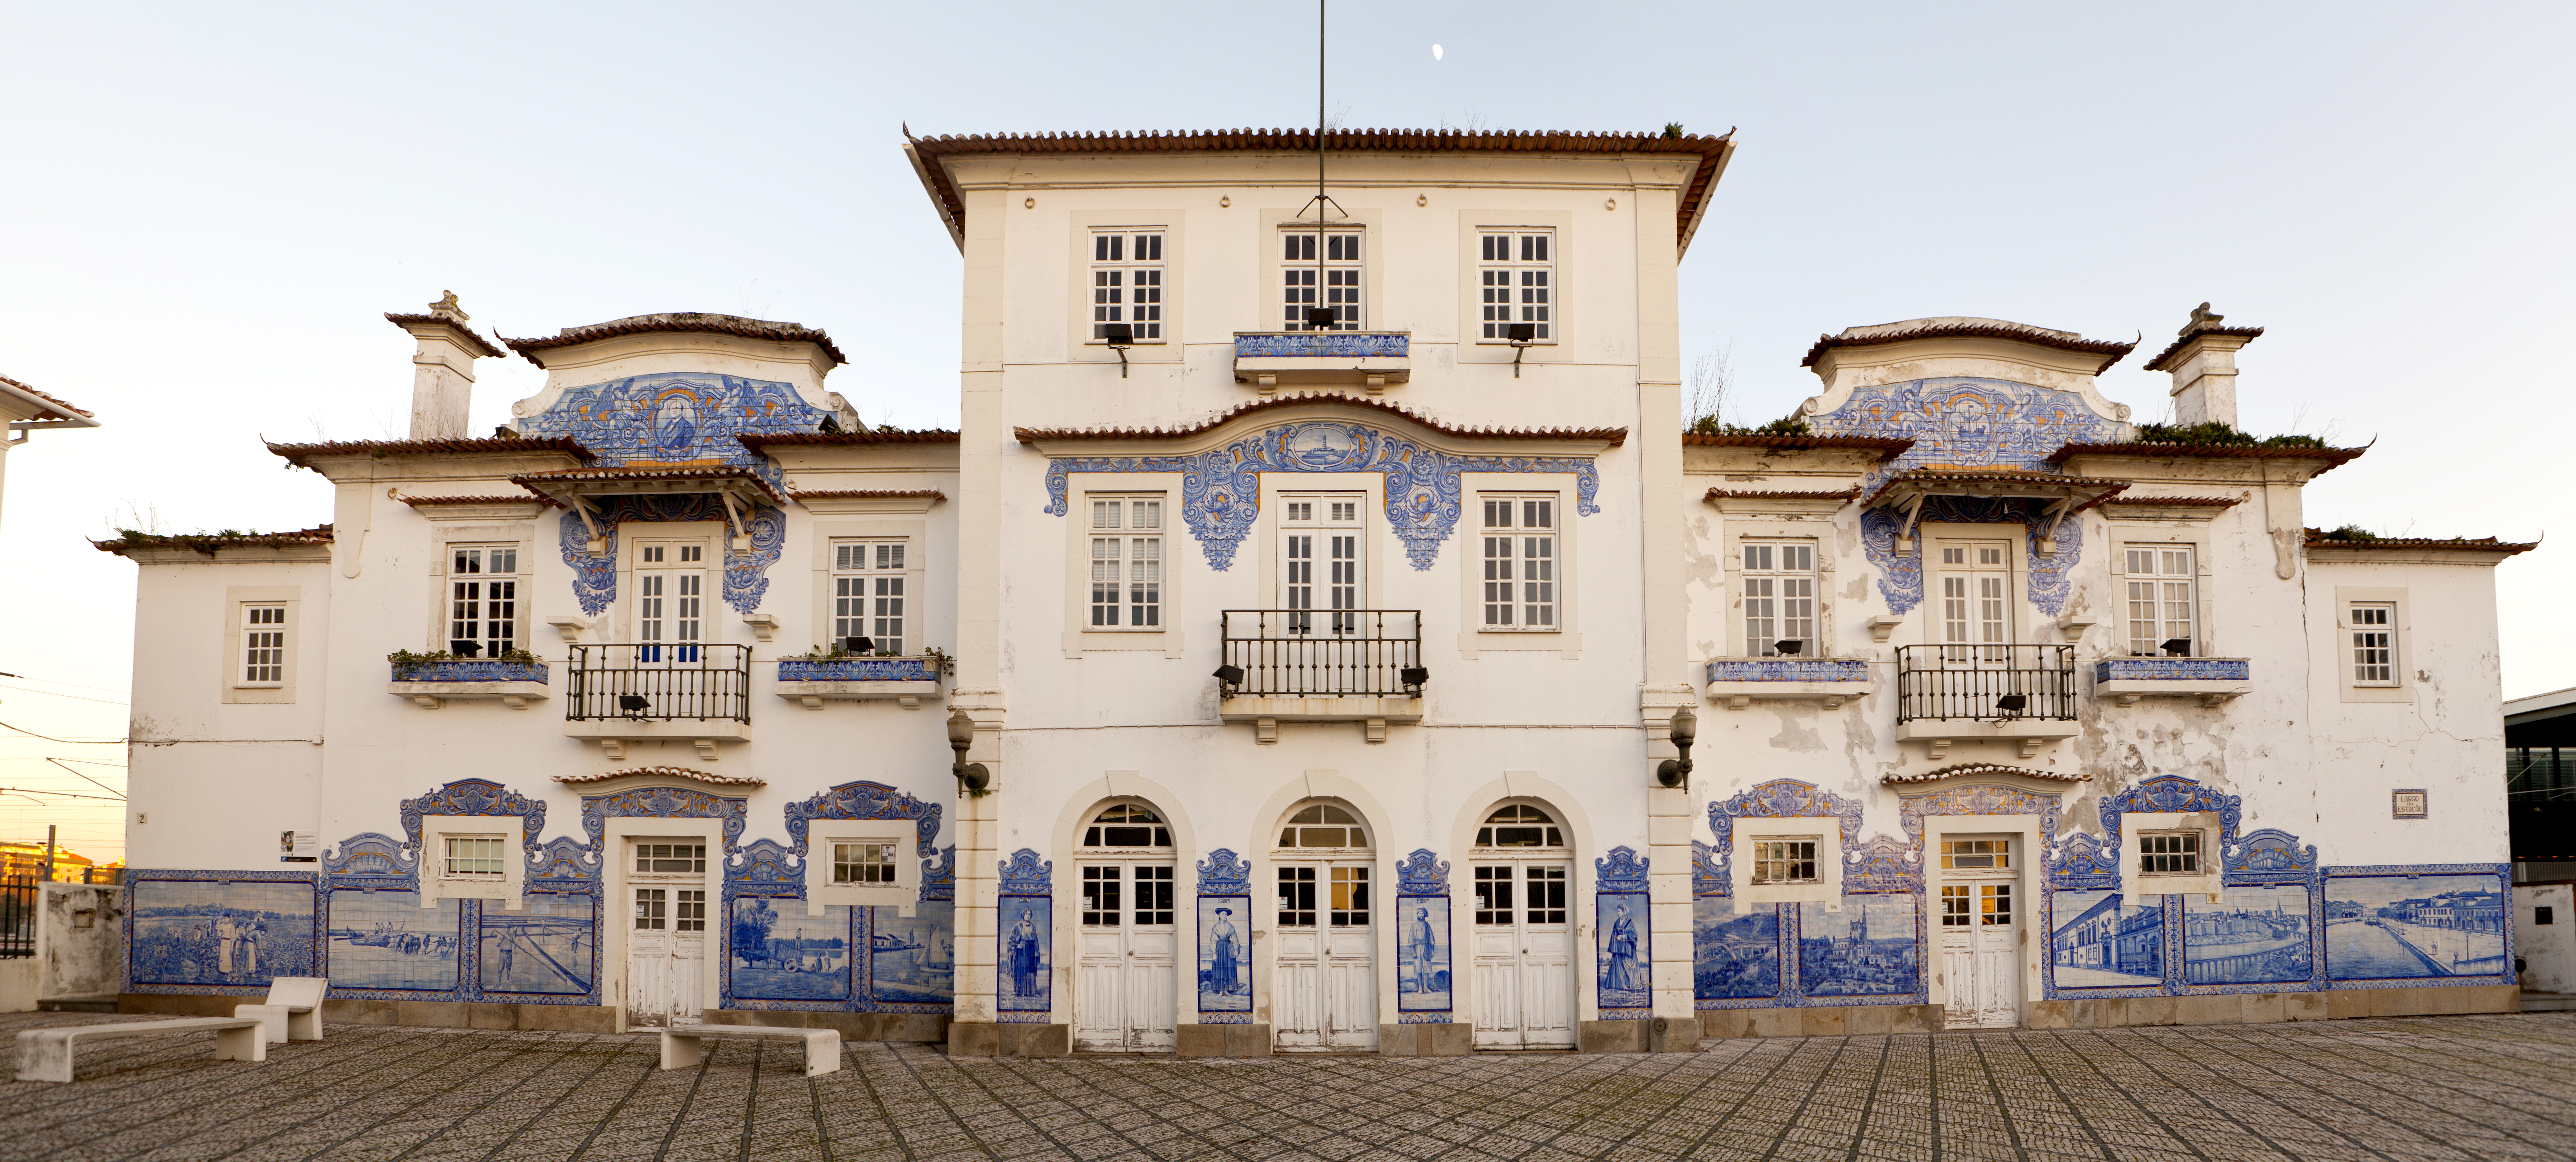 a building with blue painted walls